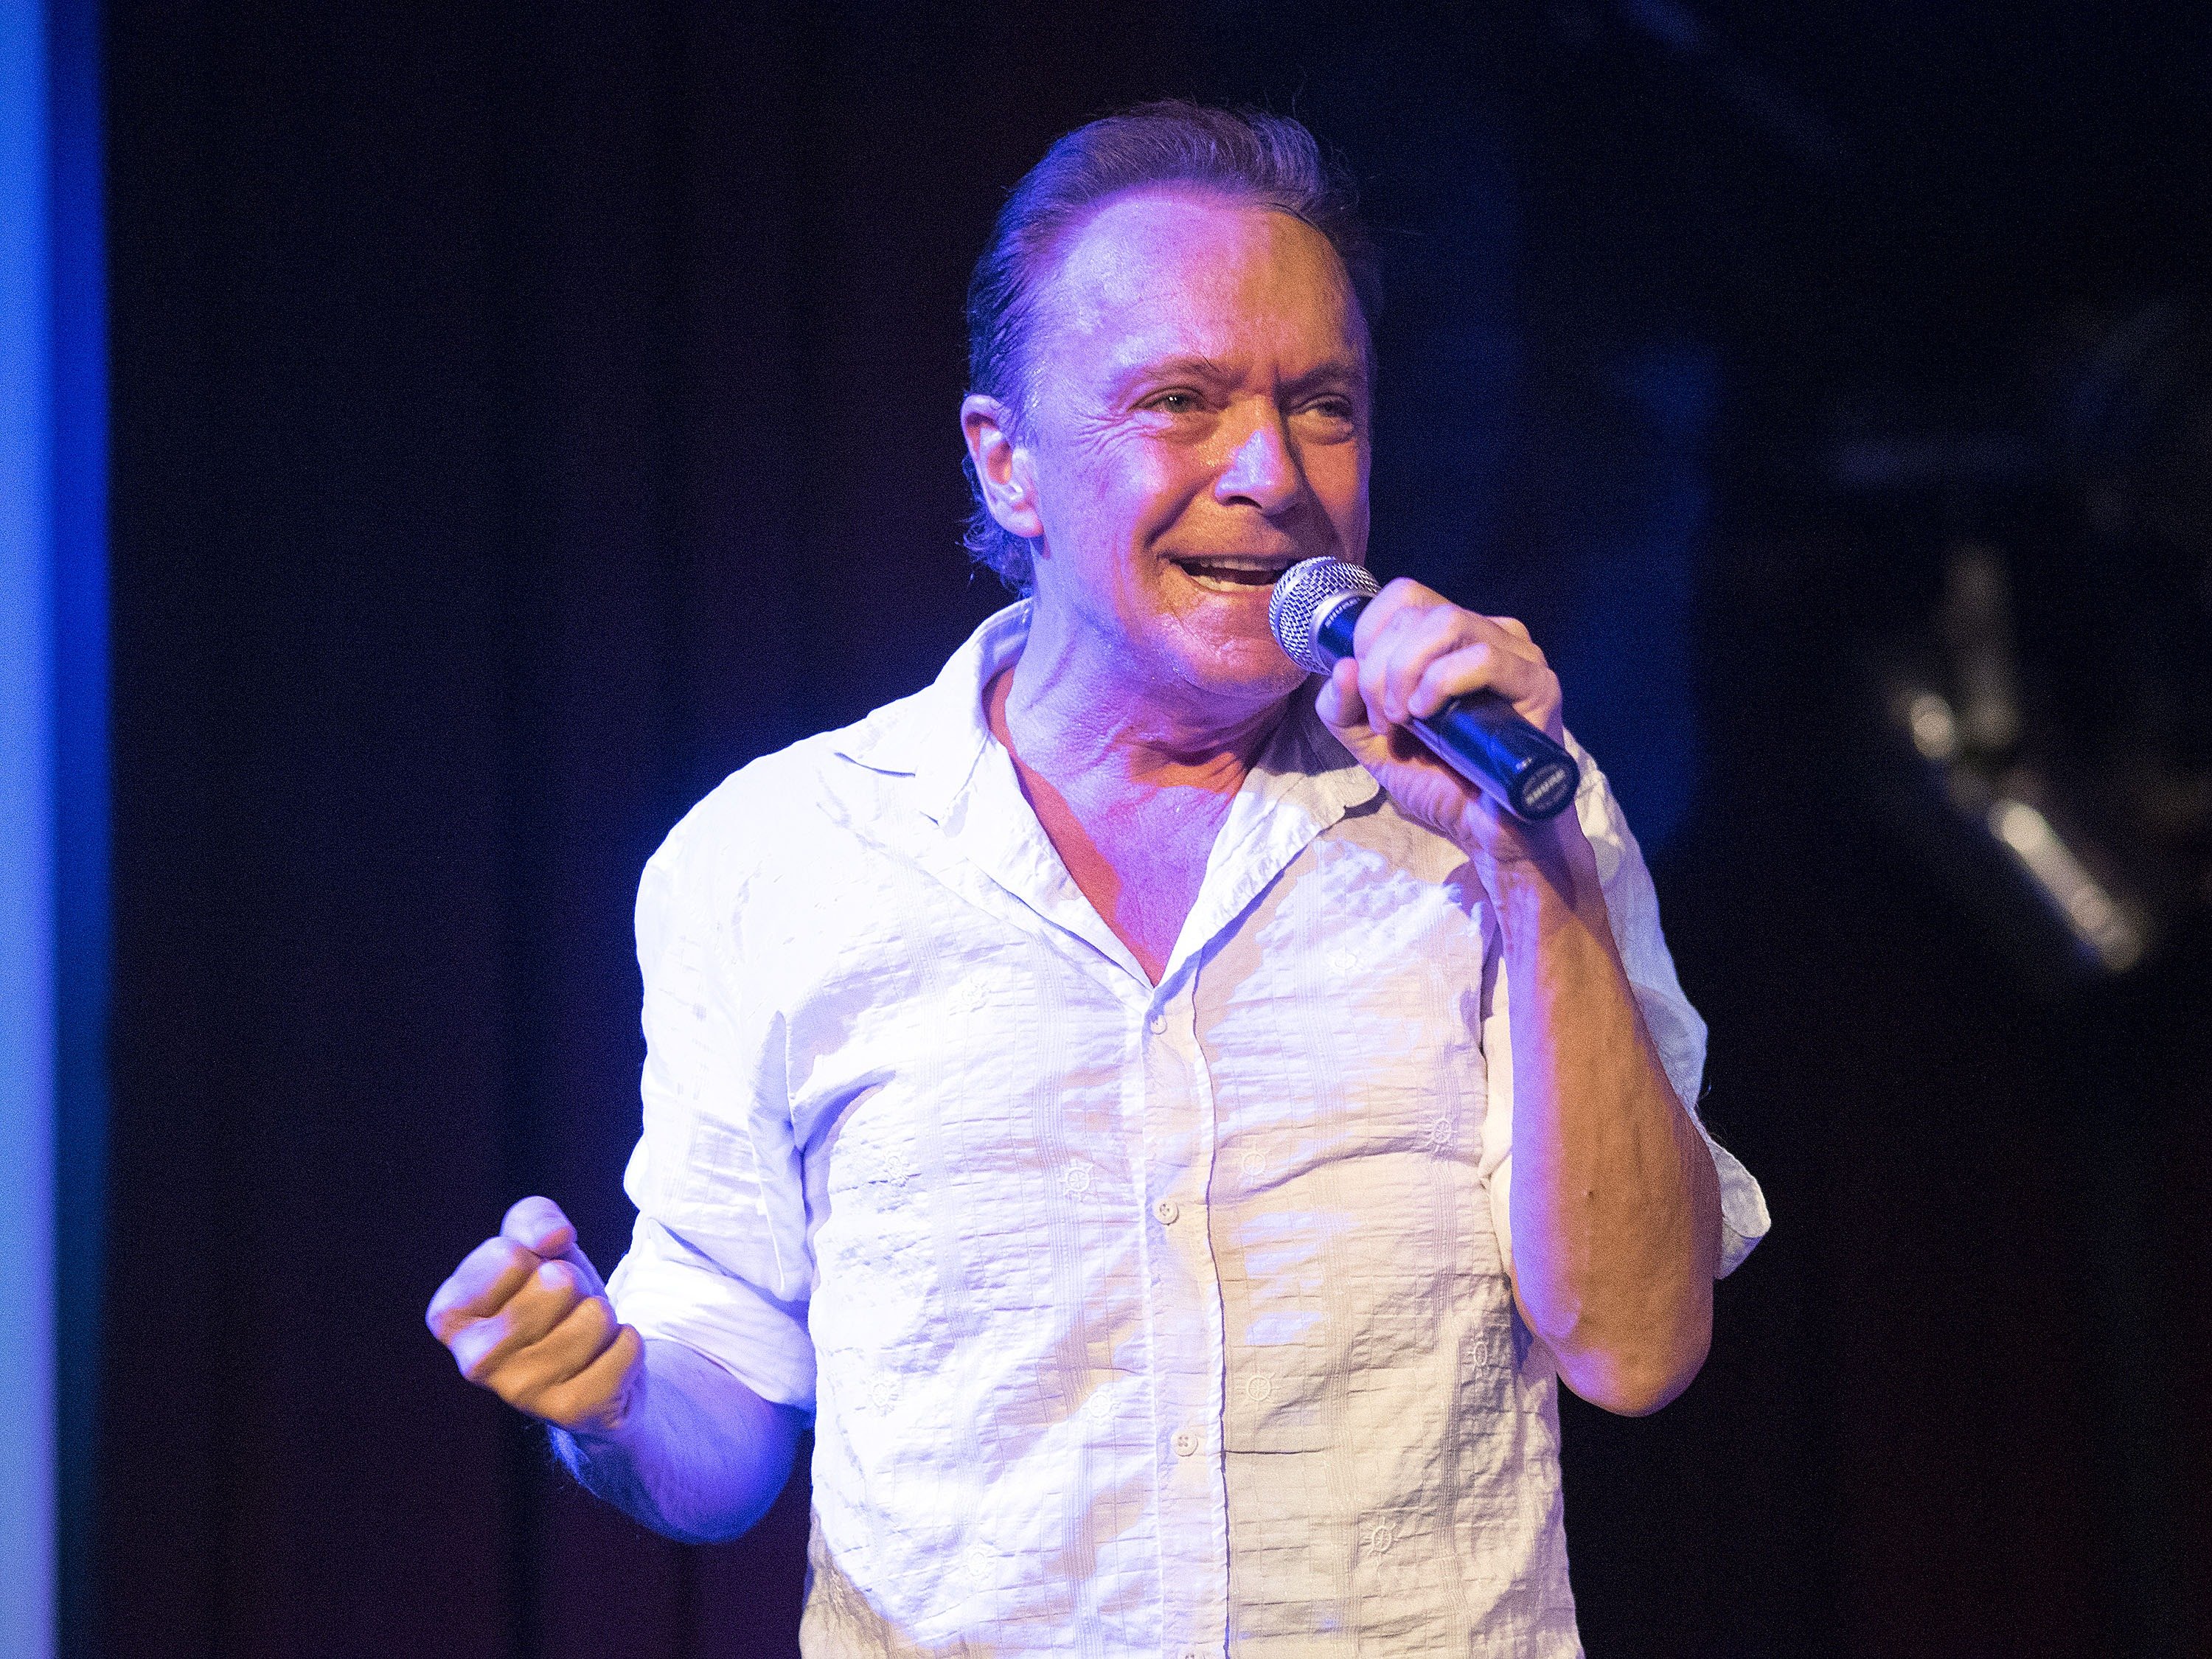 David Cassidy performs at BB King on January 10, 2015 in New York City. | Photo: Getty Images